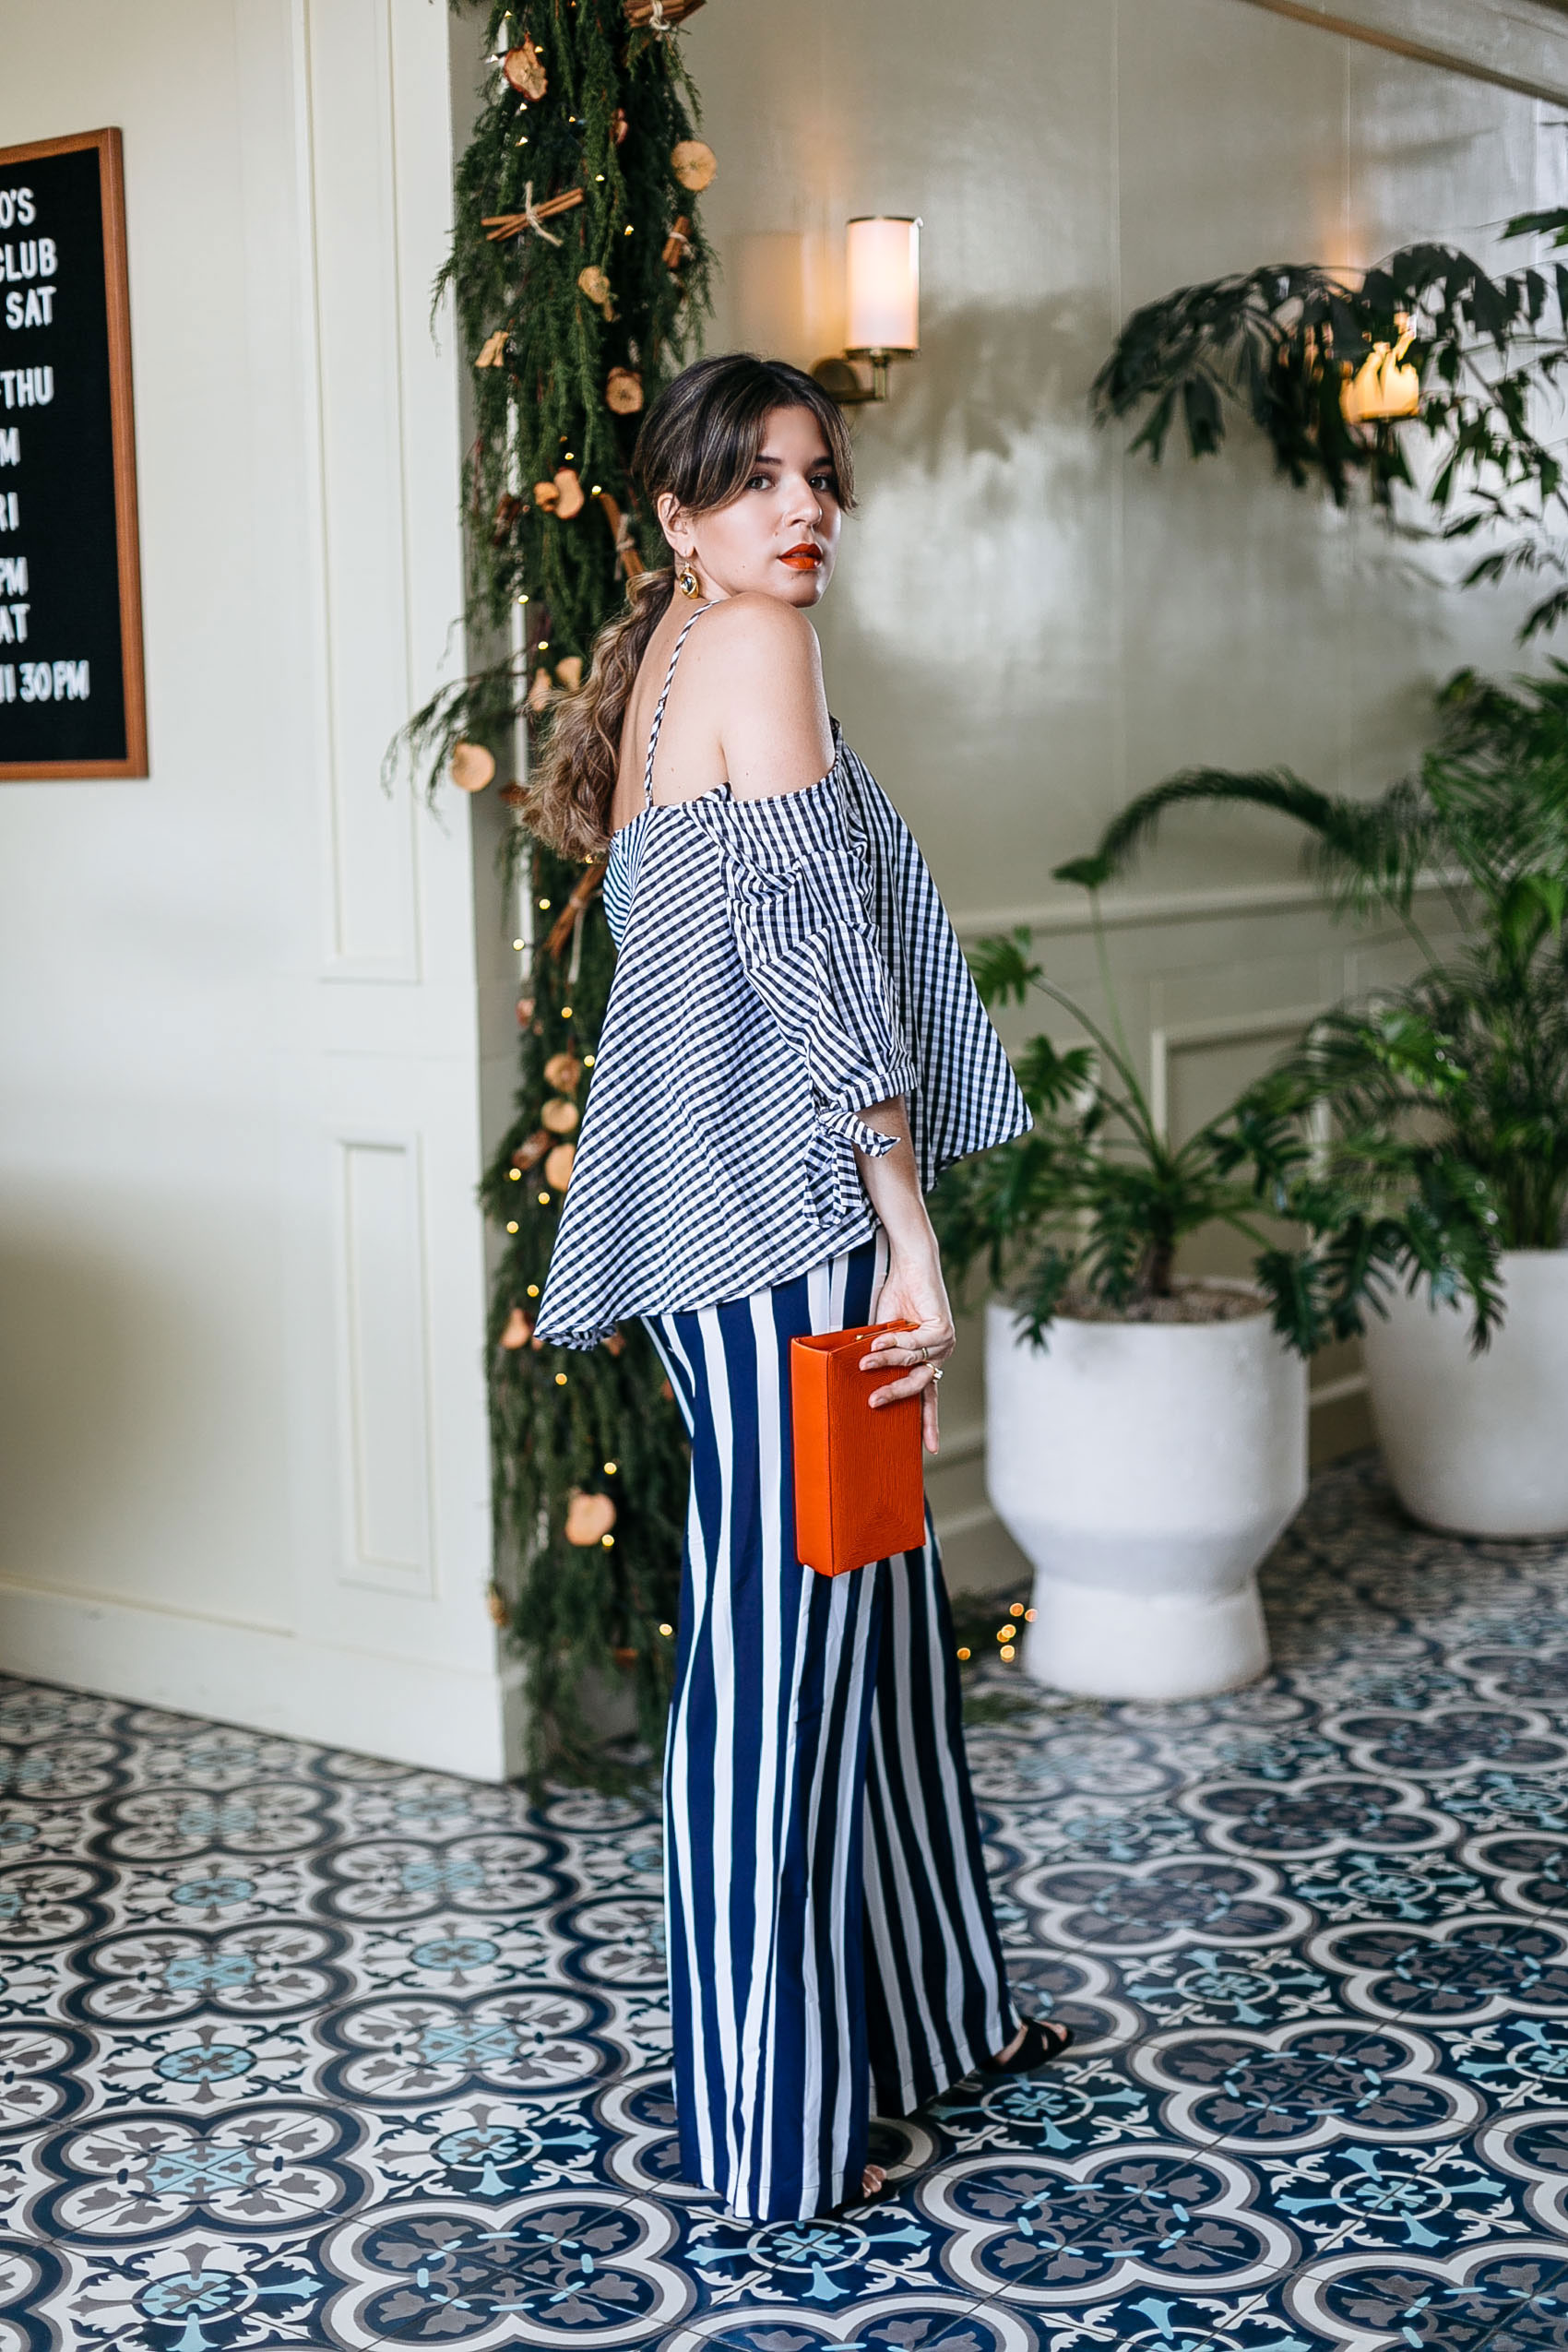 Maristella wears a loose blouse and wide leg pants for a relaxed elegant look for the holidays